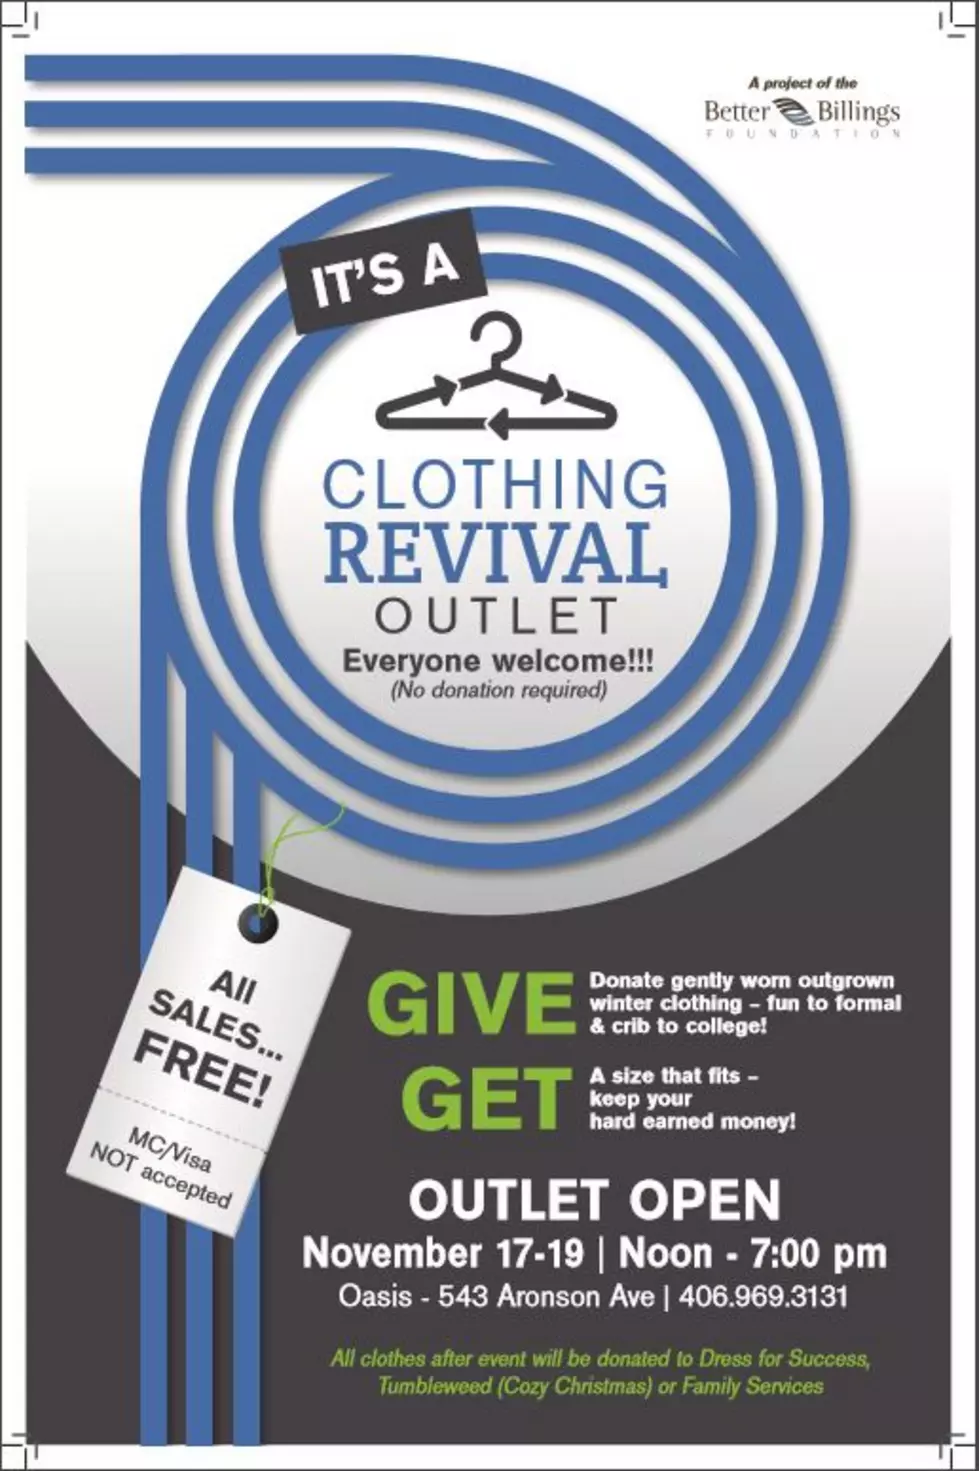 Clothing Revival Outlet